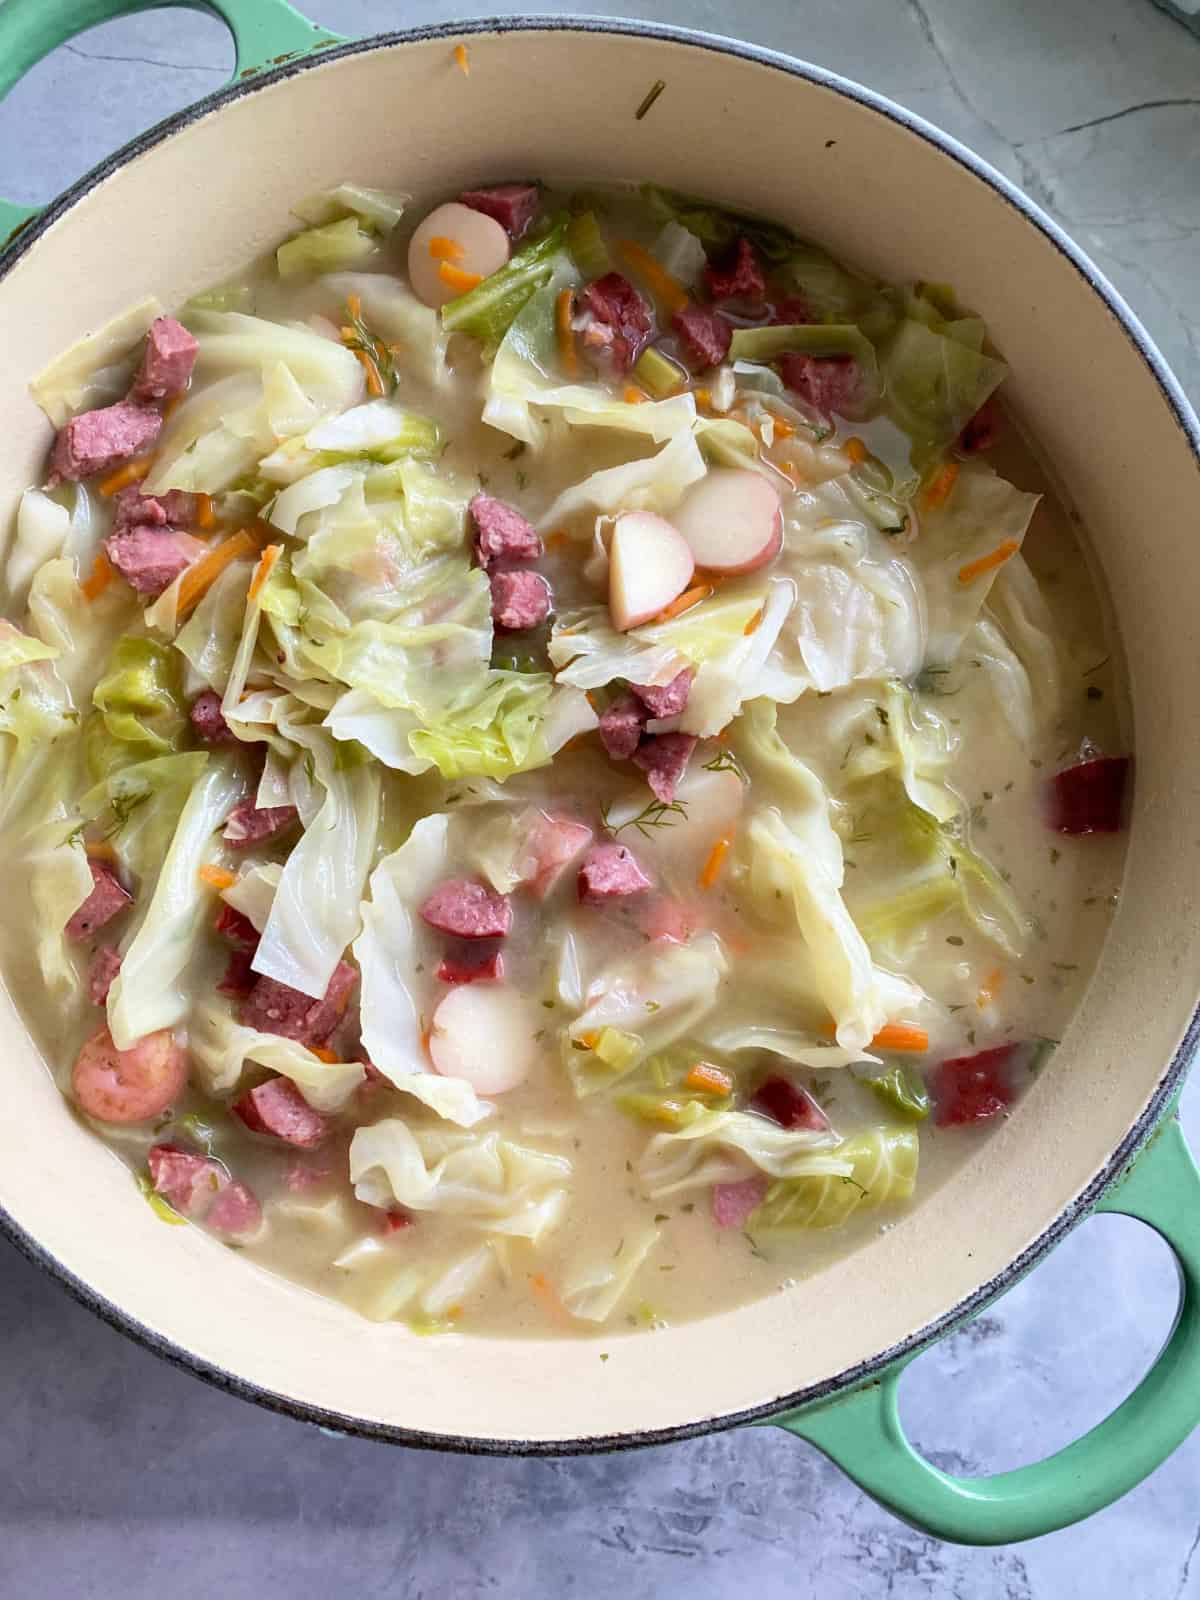 Large green pot filled with cabbage, sausage, potatoes, and broth on a marble countertop.